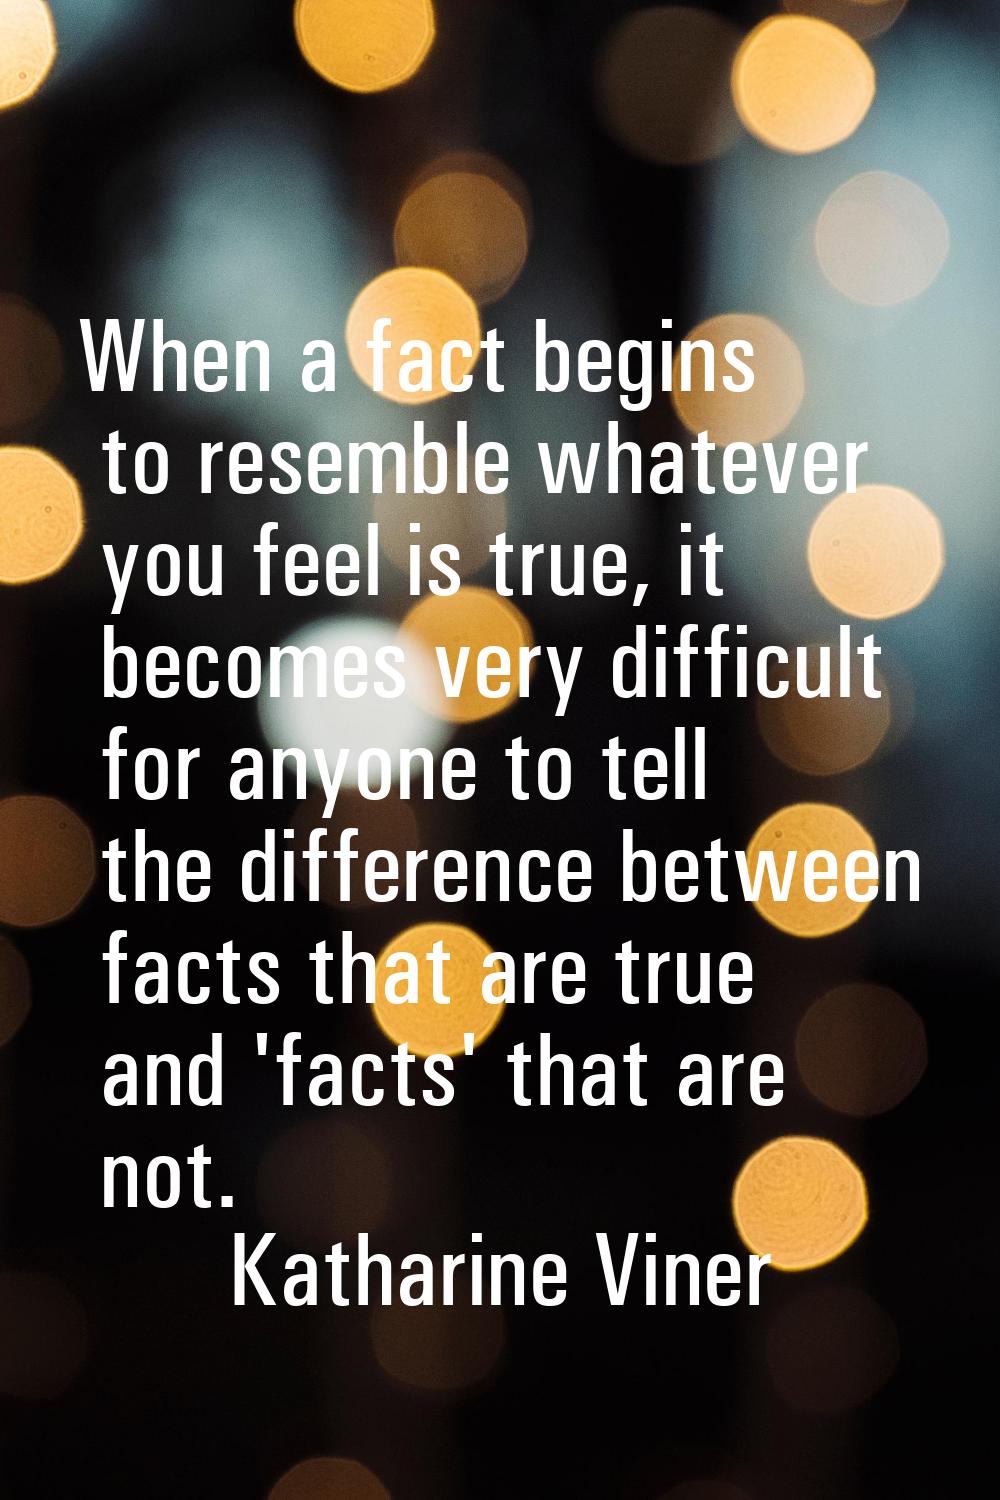 When a fact begins to resemble whatever you feel is true, it becomes very difficult for anyone to t